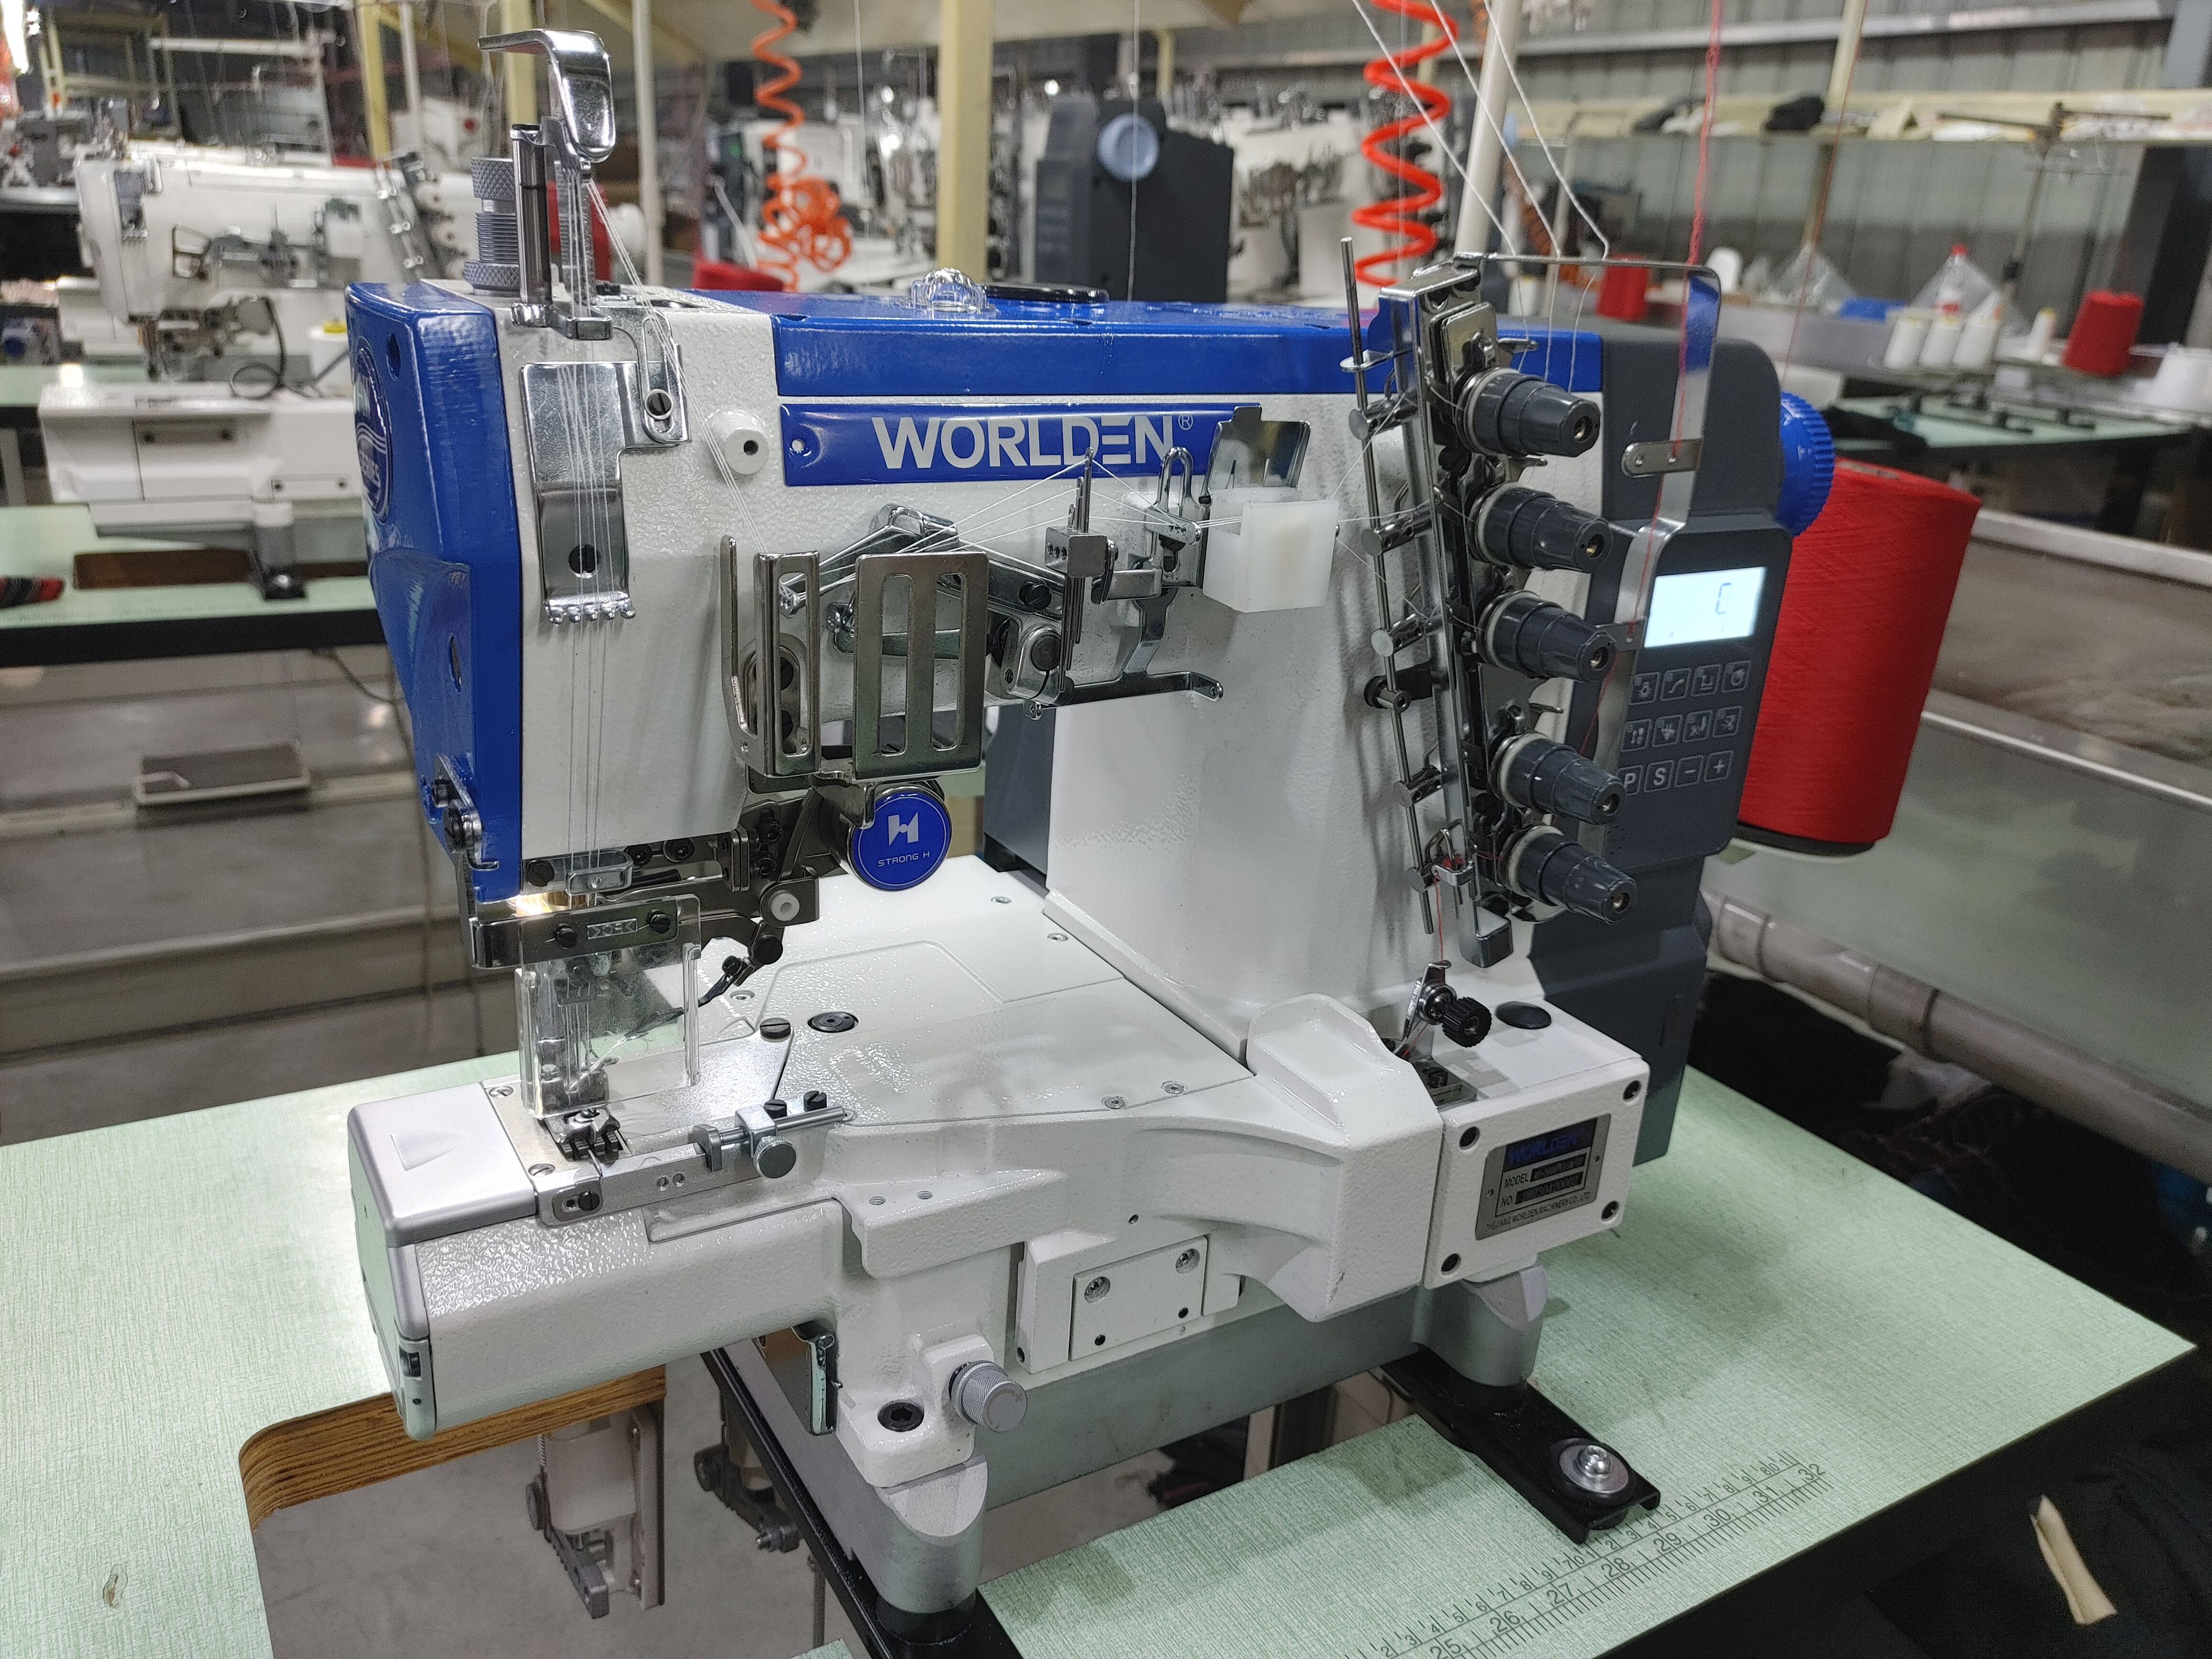 Wd-3600-01CB/UT Stepper Motor Full Automatic Cylinder Bed Interlock Sewing Machines